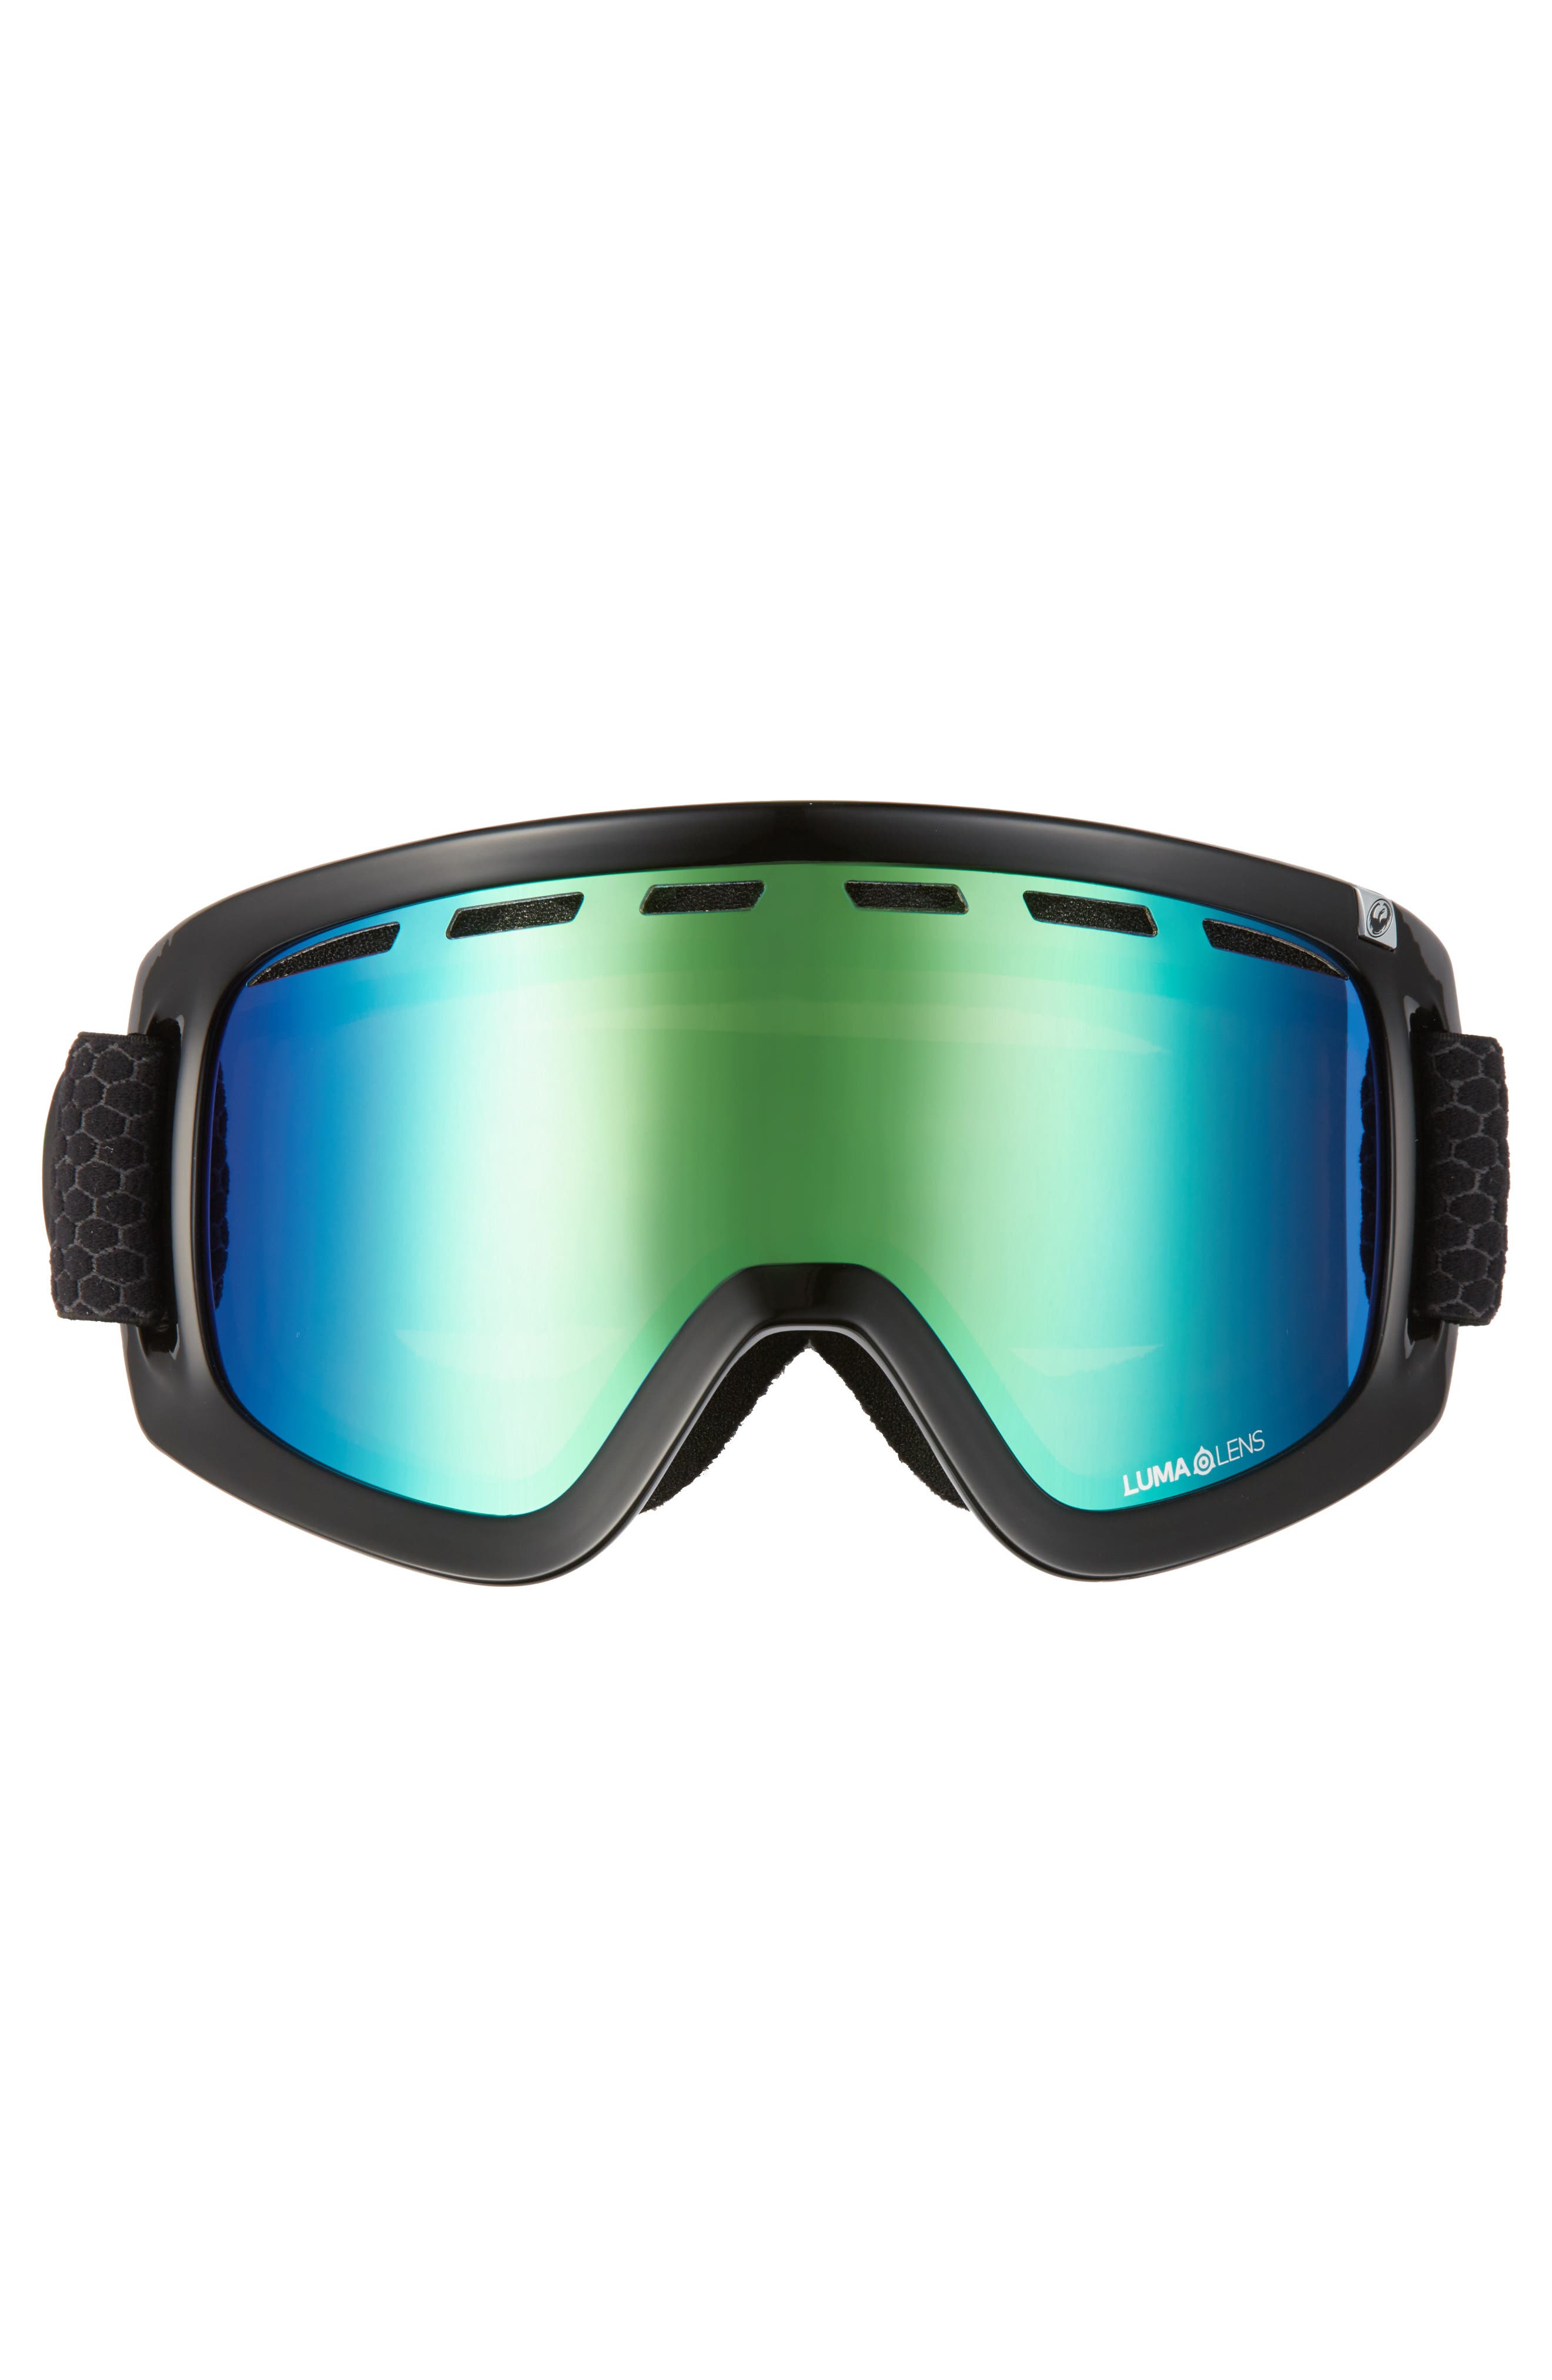 Lists @ $65 White NEW ICE Sports Tempest Ski and Snowboard Goggles 